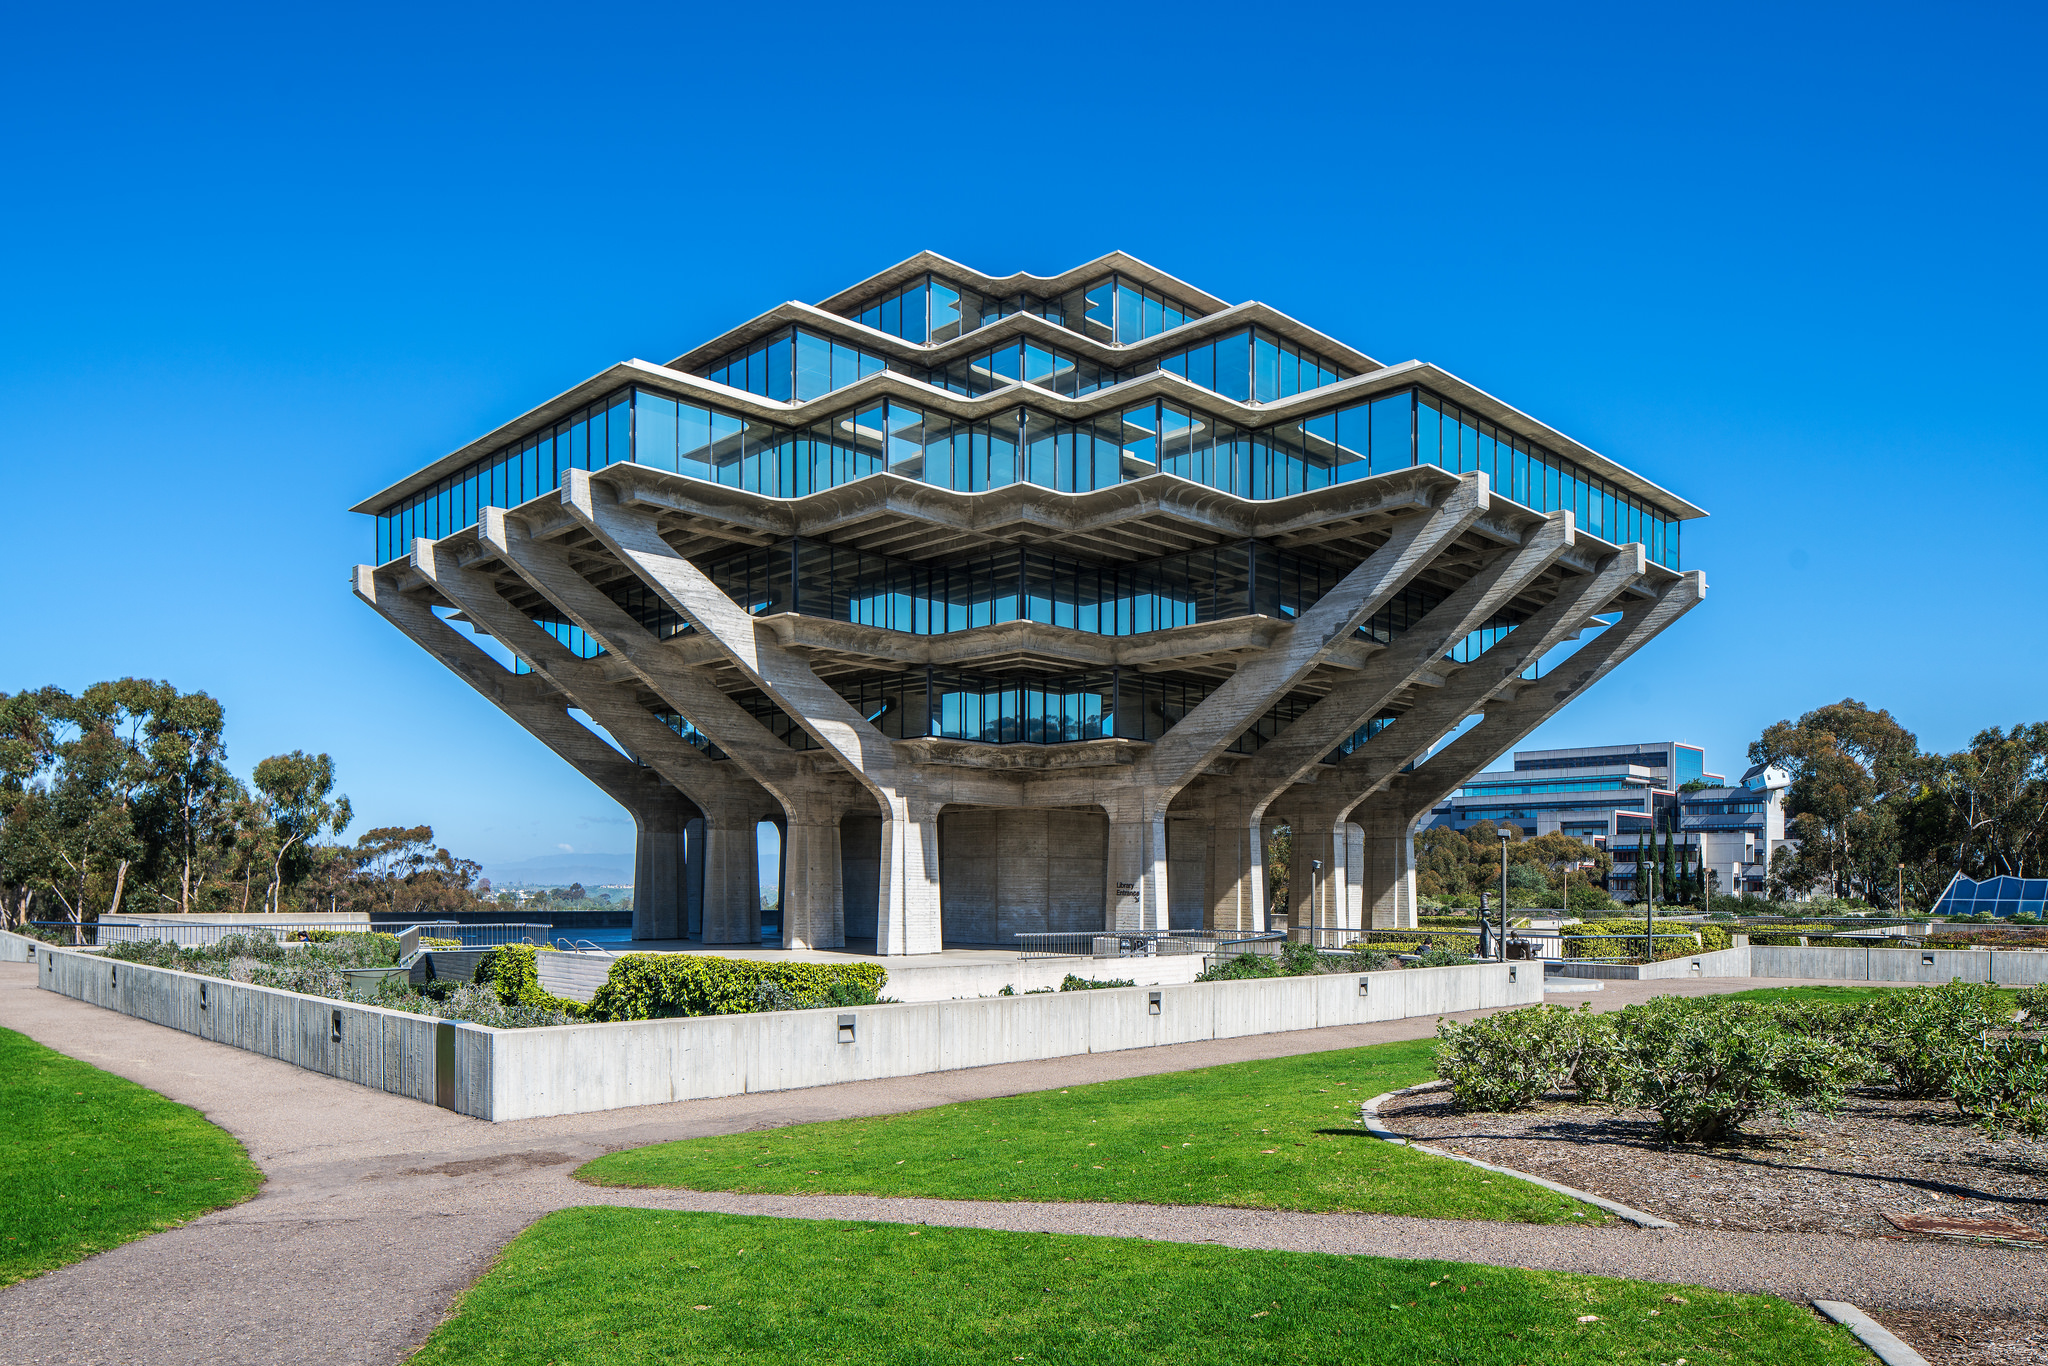 photograph showing the southwest elevation of the Geisel Library at the University of San Diego